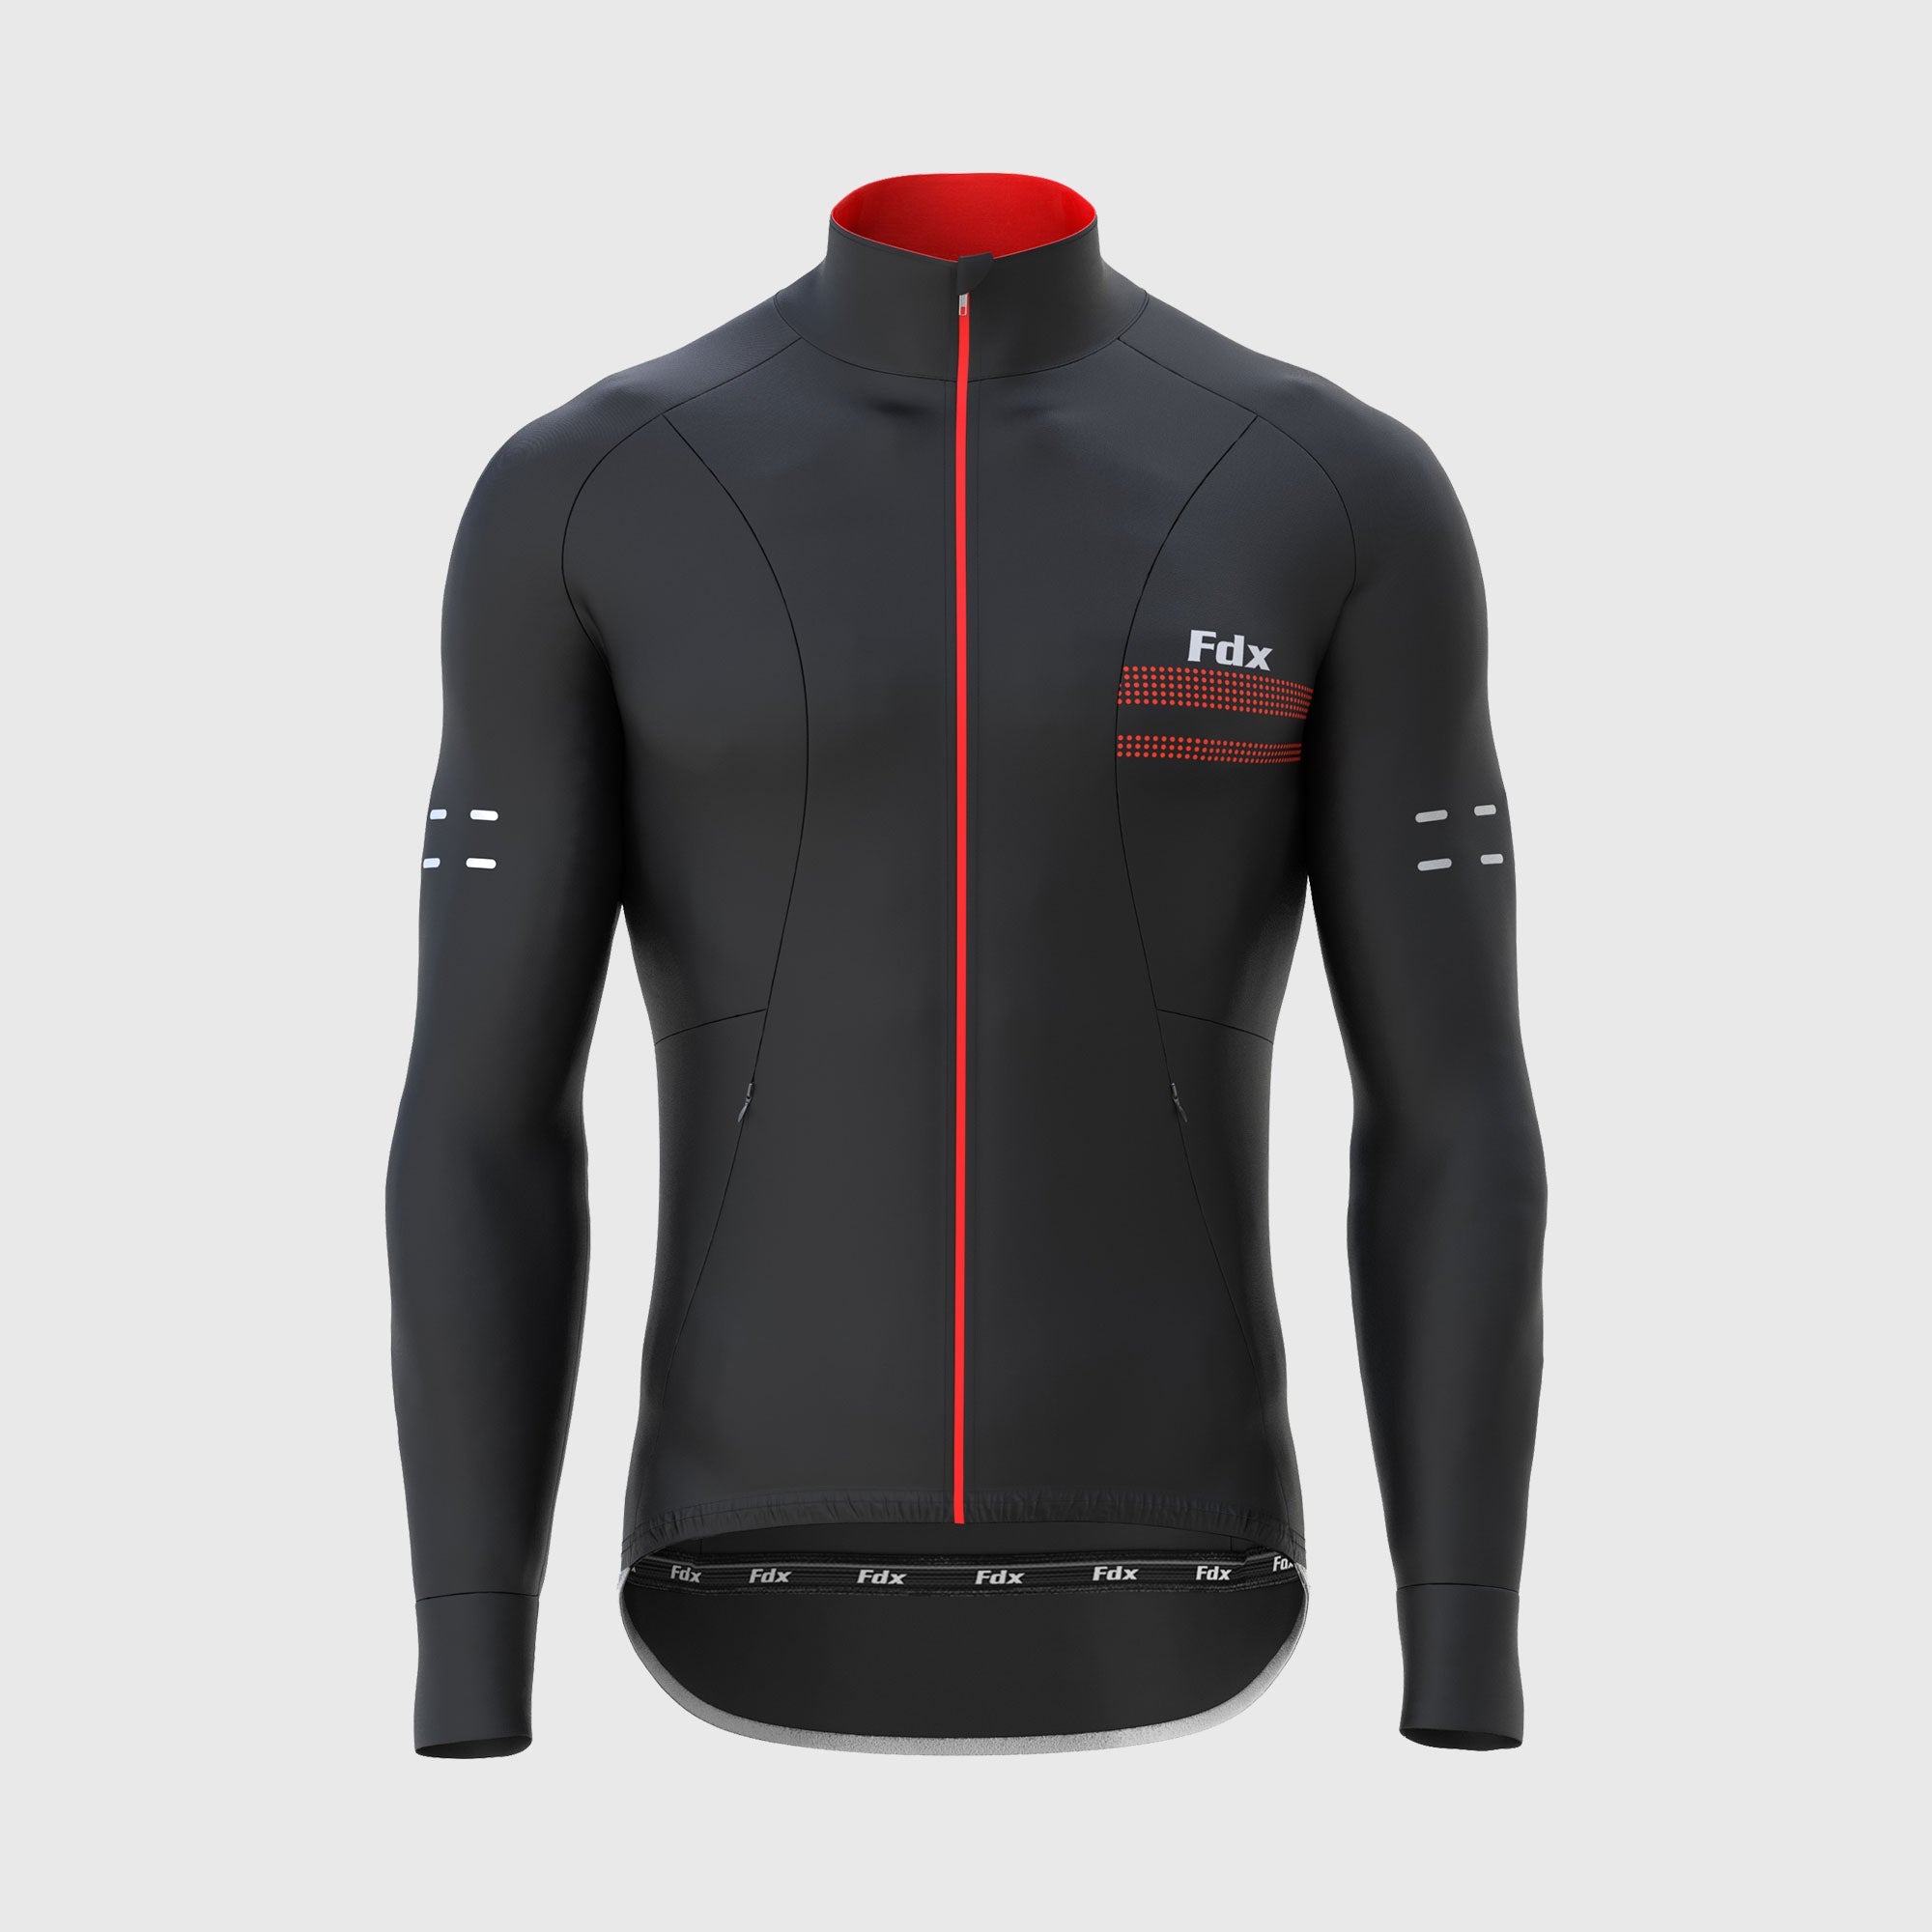 Fdx Arch Men's Red Thermal Long Sleeve Cycling Jersey